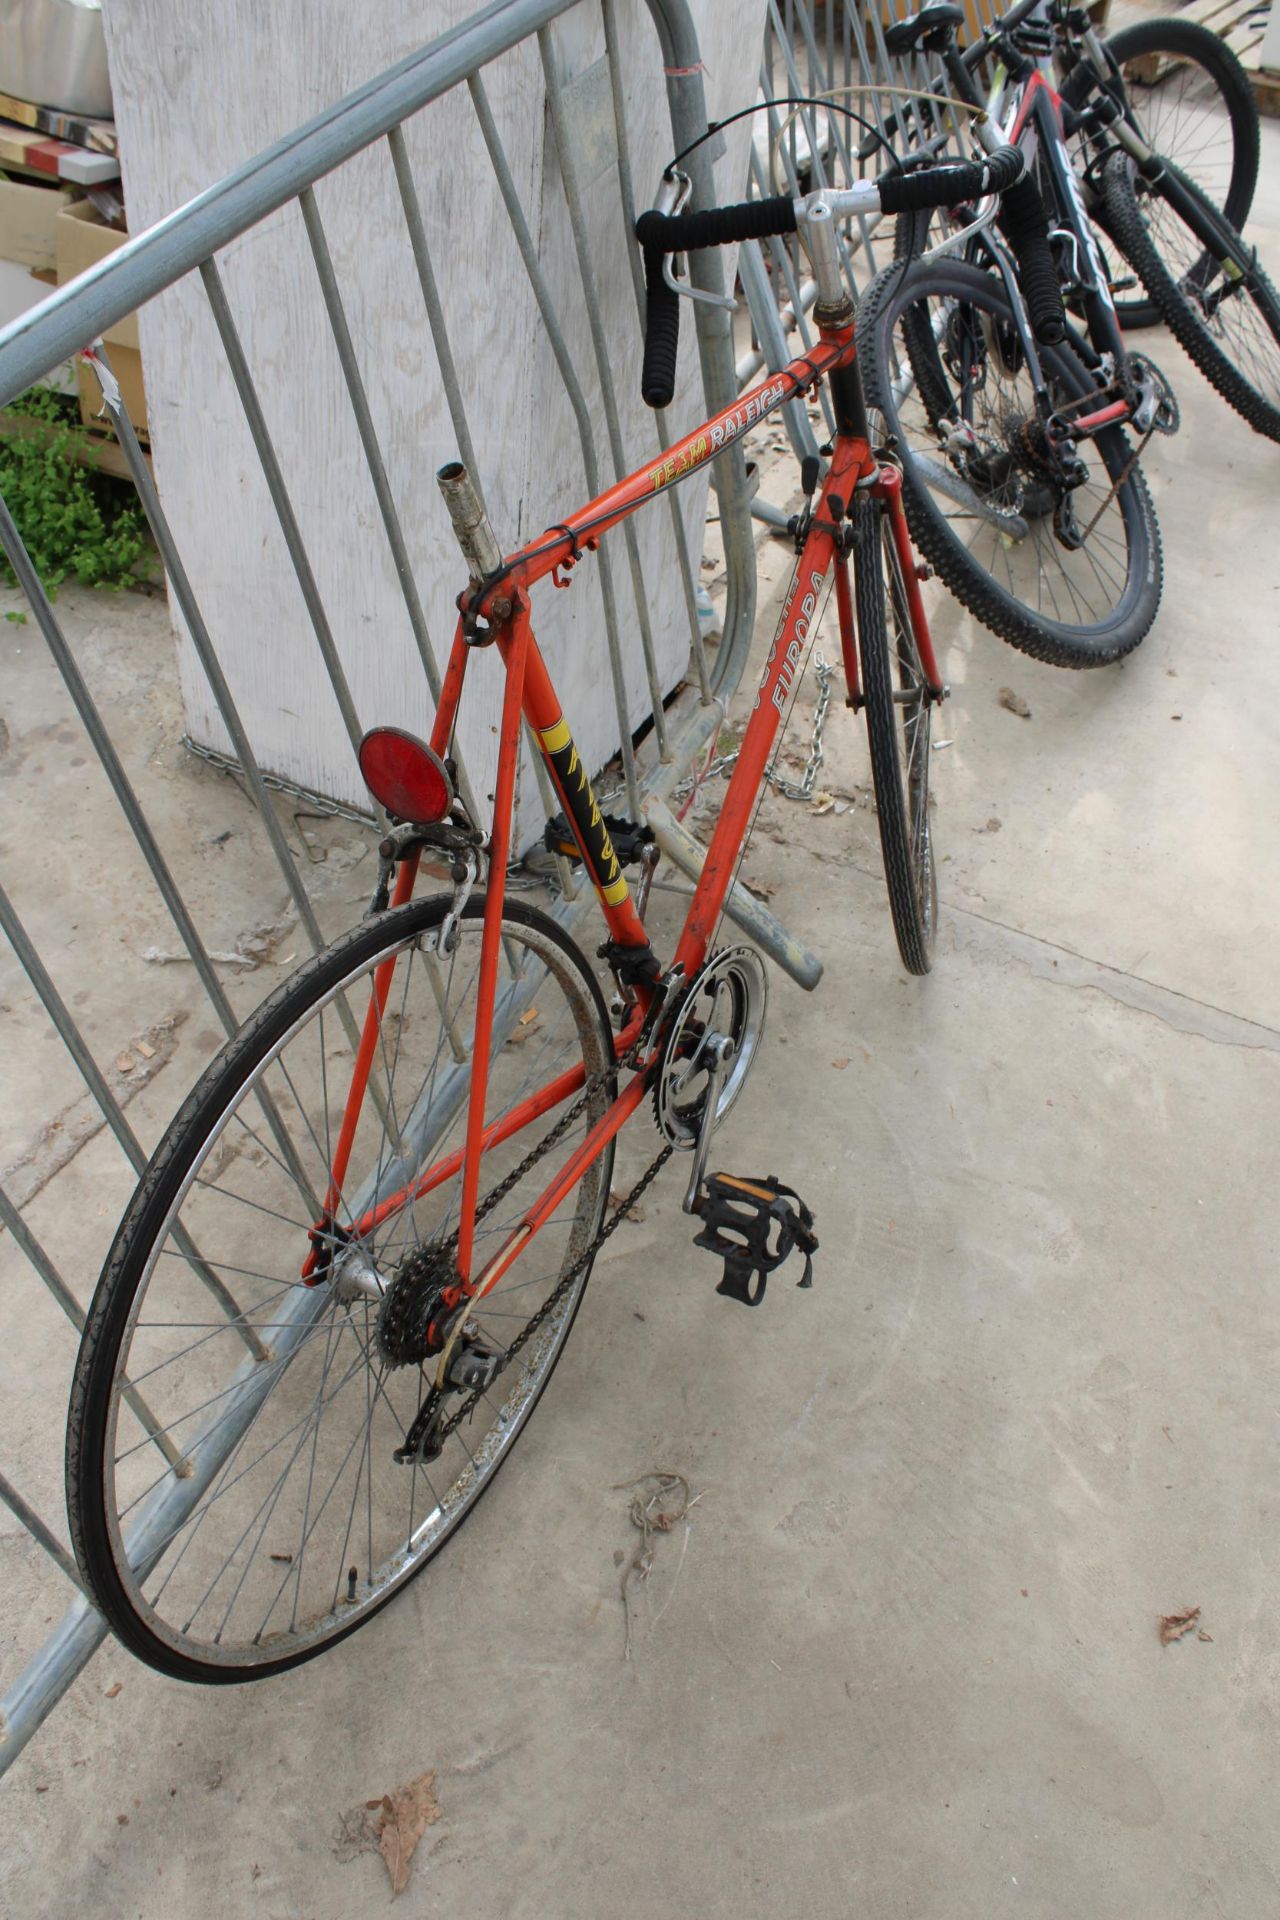 A VINTAGE RALEIGH EUROPA ROAD BIKE WITH 12 SPEED GEAR SYSTEM (NO SEAT) - Image 2 of 3